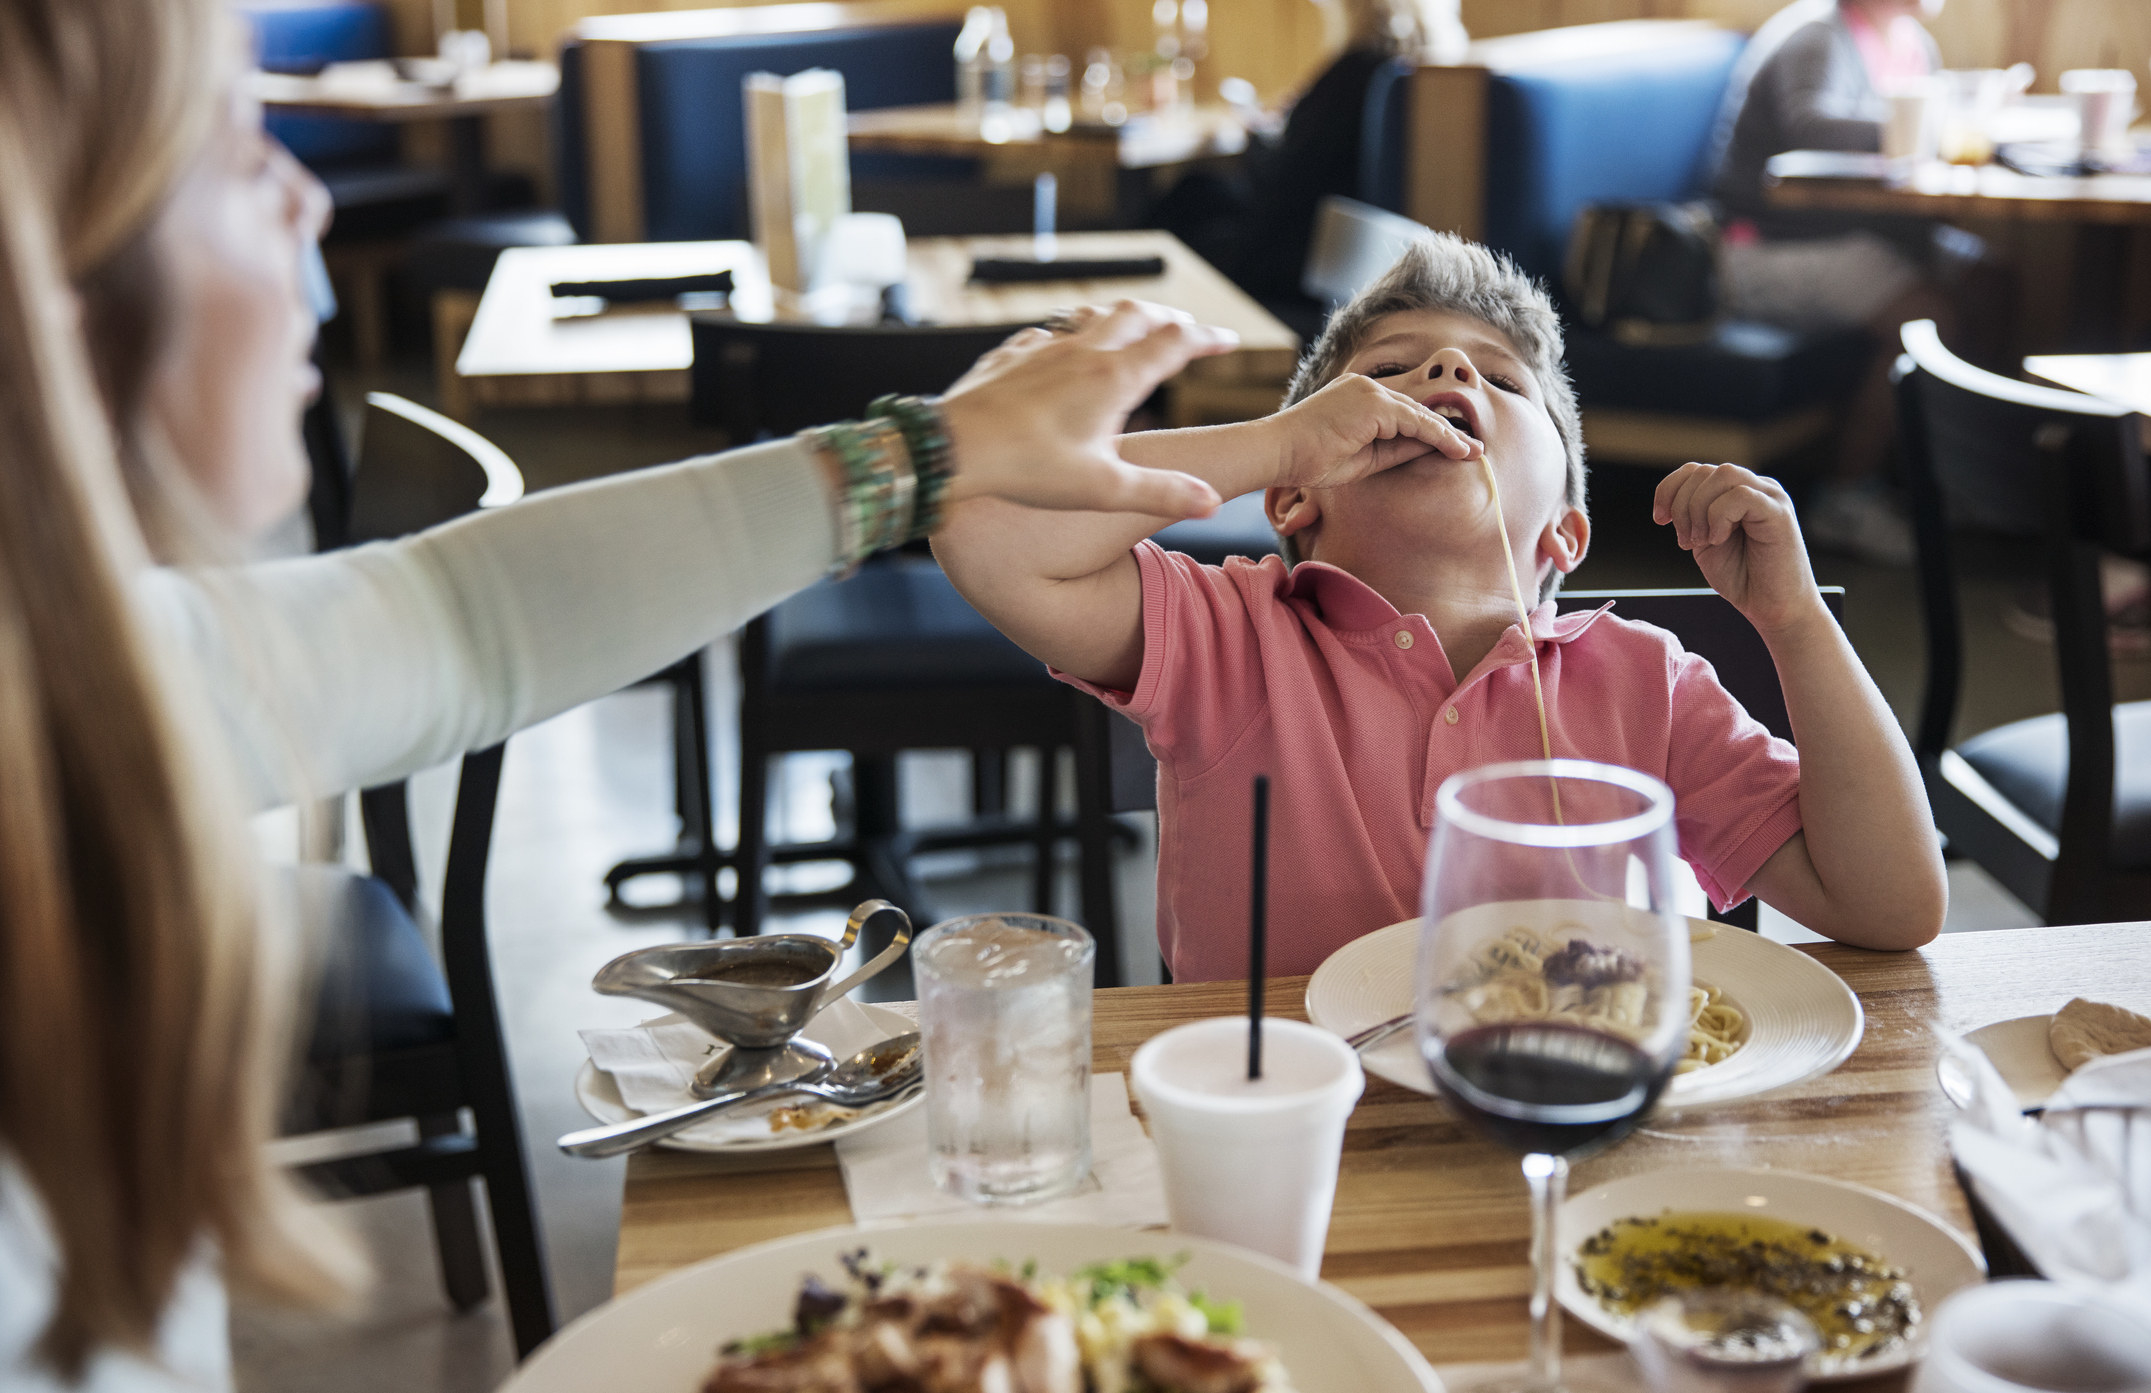 A little boy at a restaurant with his parents